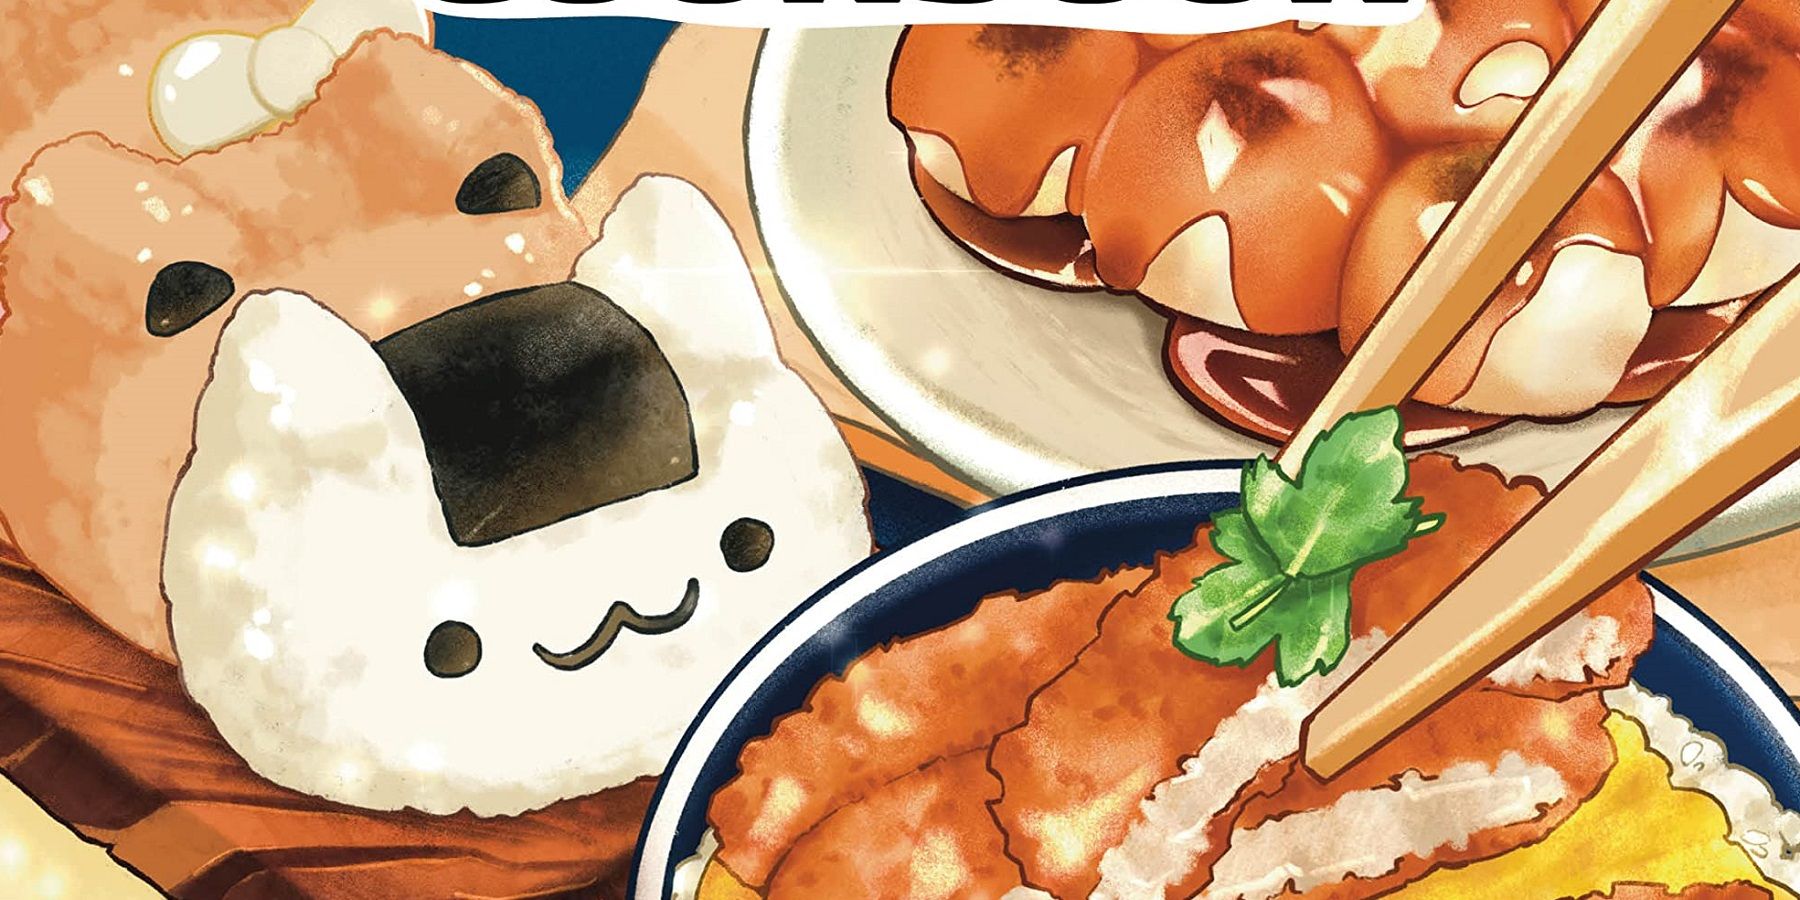 Delicious in Dungeon Recipes - Top 4 Dishes by Senshi that you can Recreate